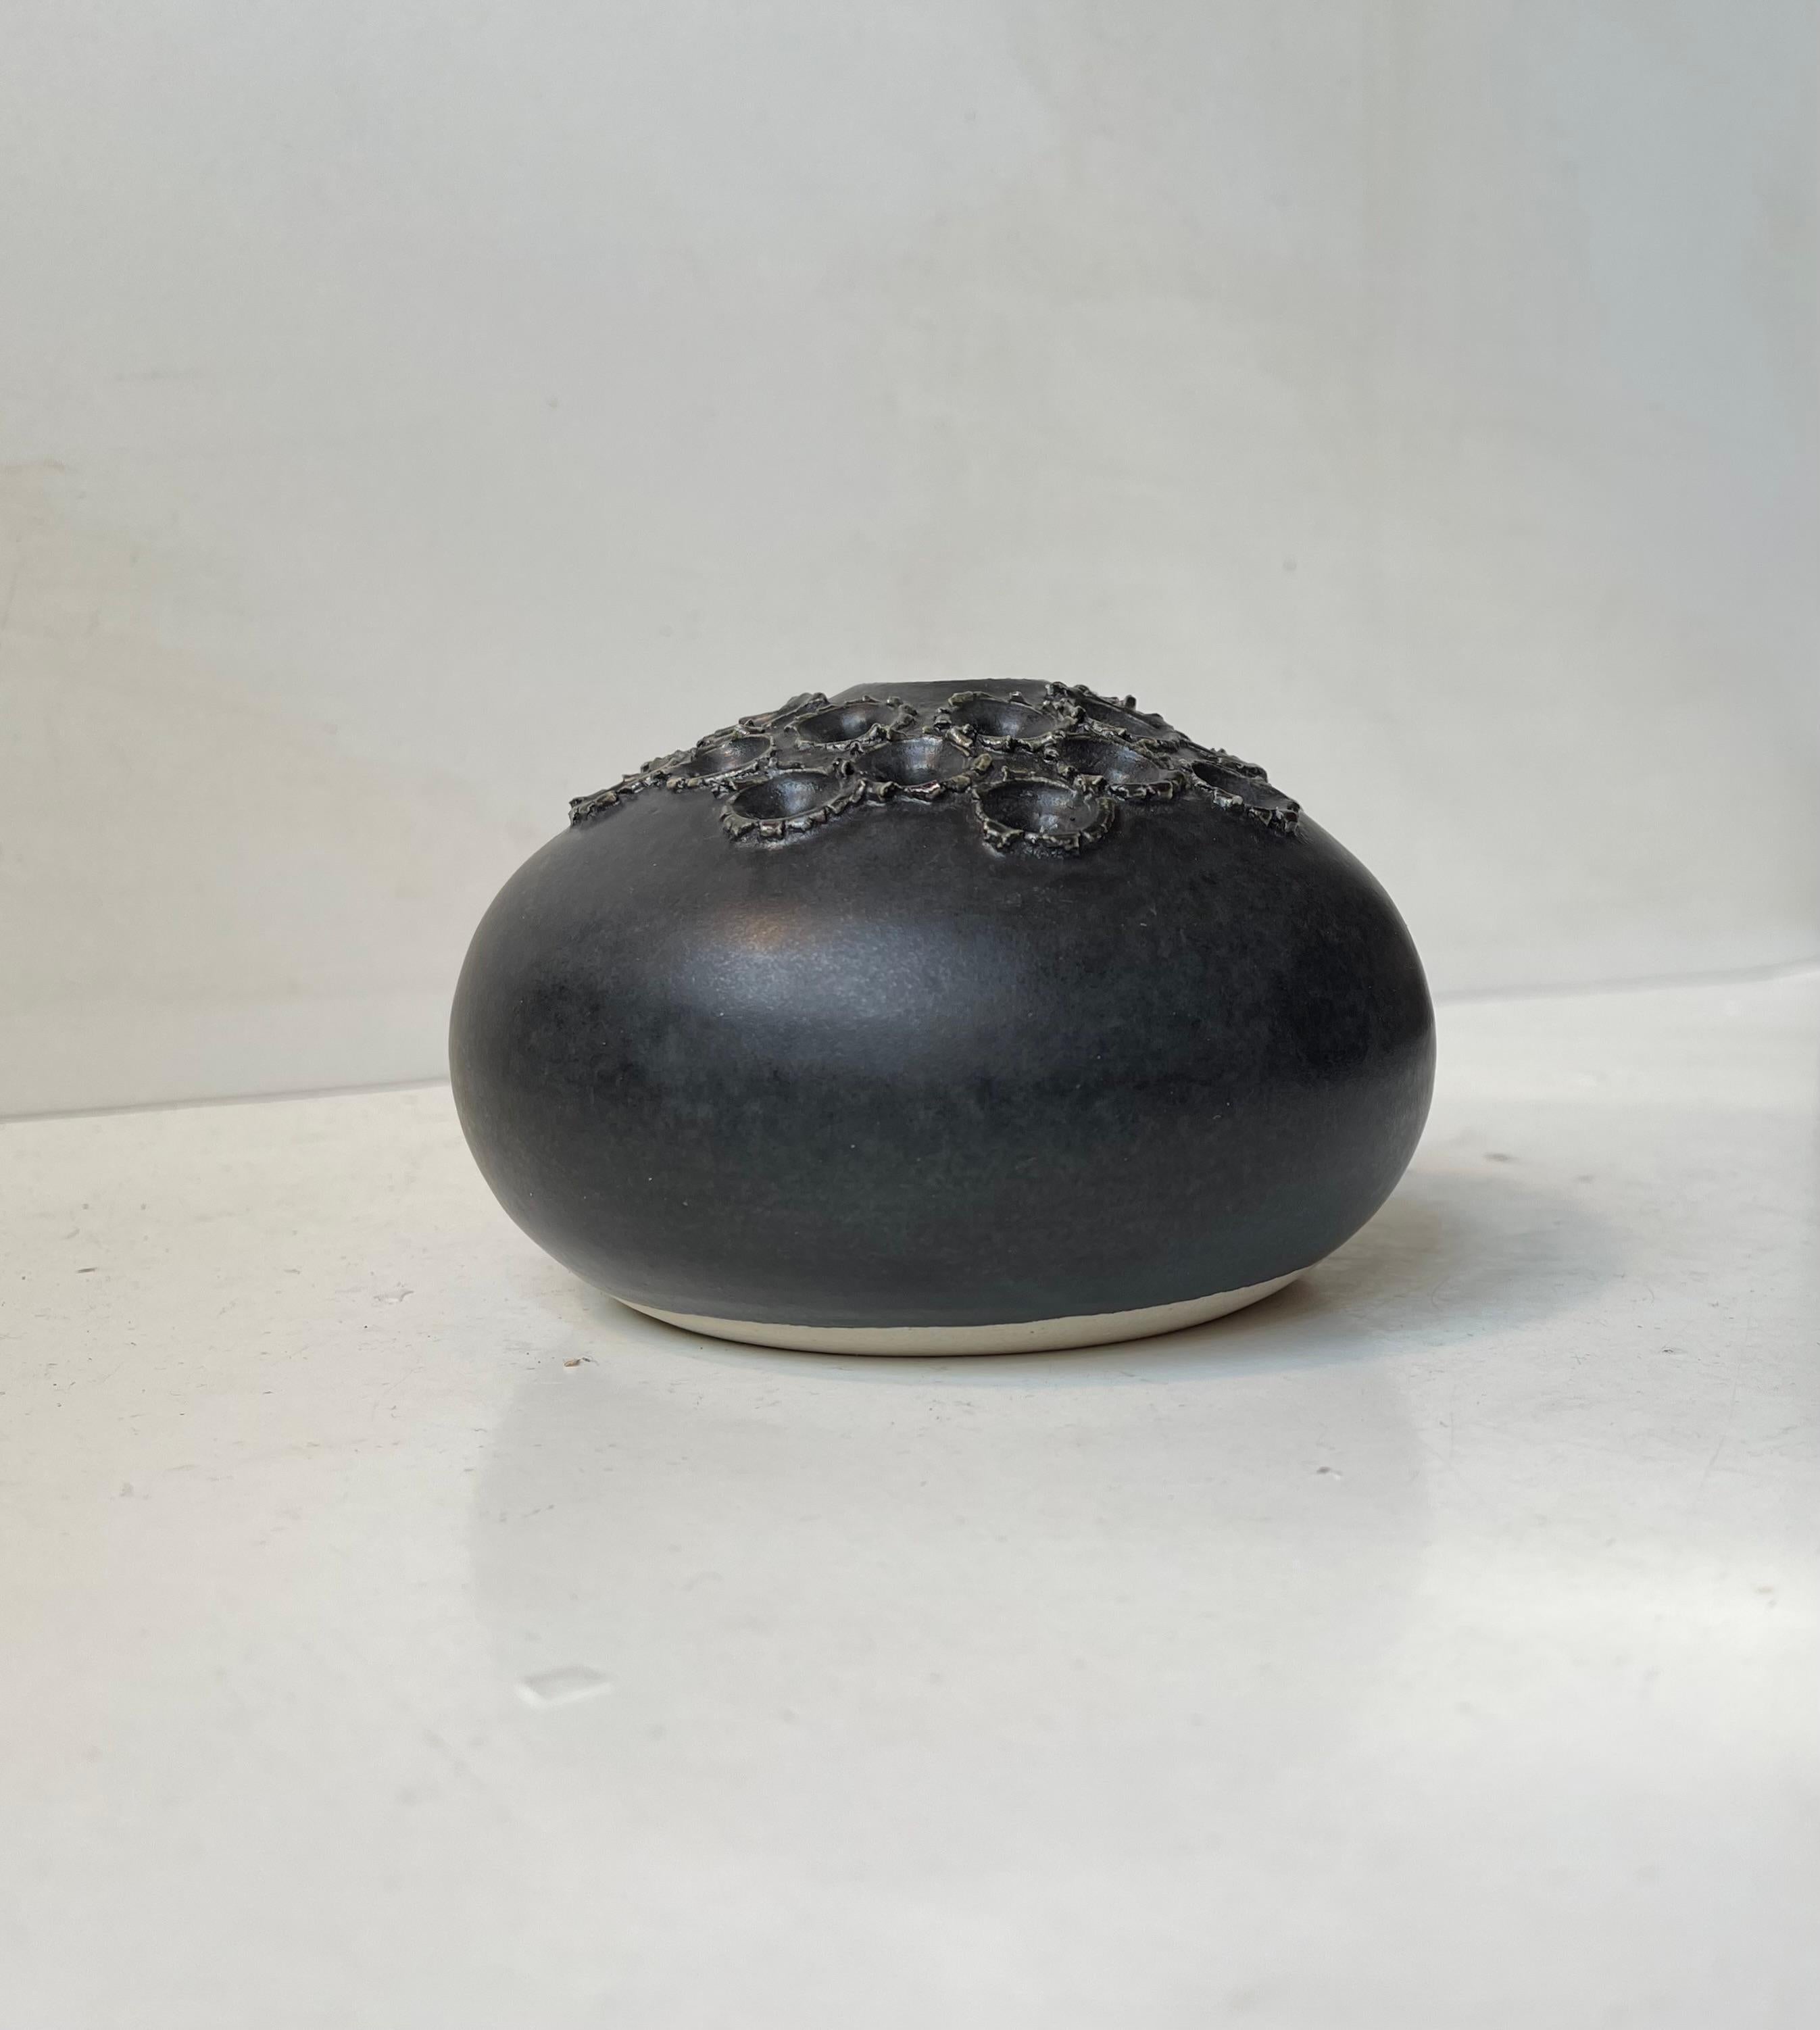 Organically shaped pottery vase with satin black glaze and brutalist decor that doubles as holes for cut flower arrangement. Designed by danish ceramist Aage Würtz in the early 1970s. Its signed to the base. Measurements: D: 12 cm, H: 7 cm.
